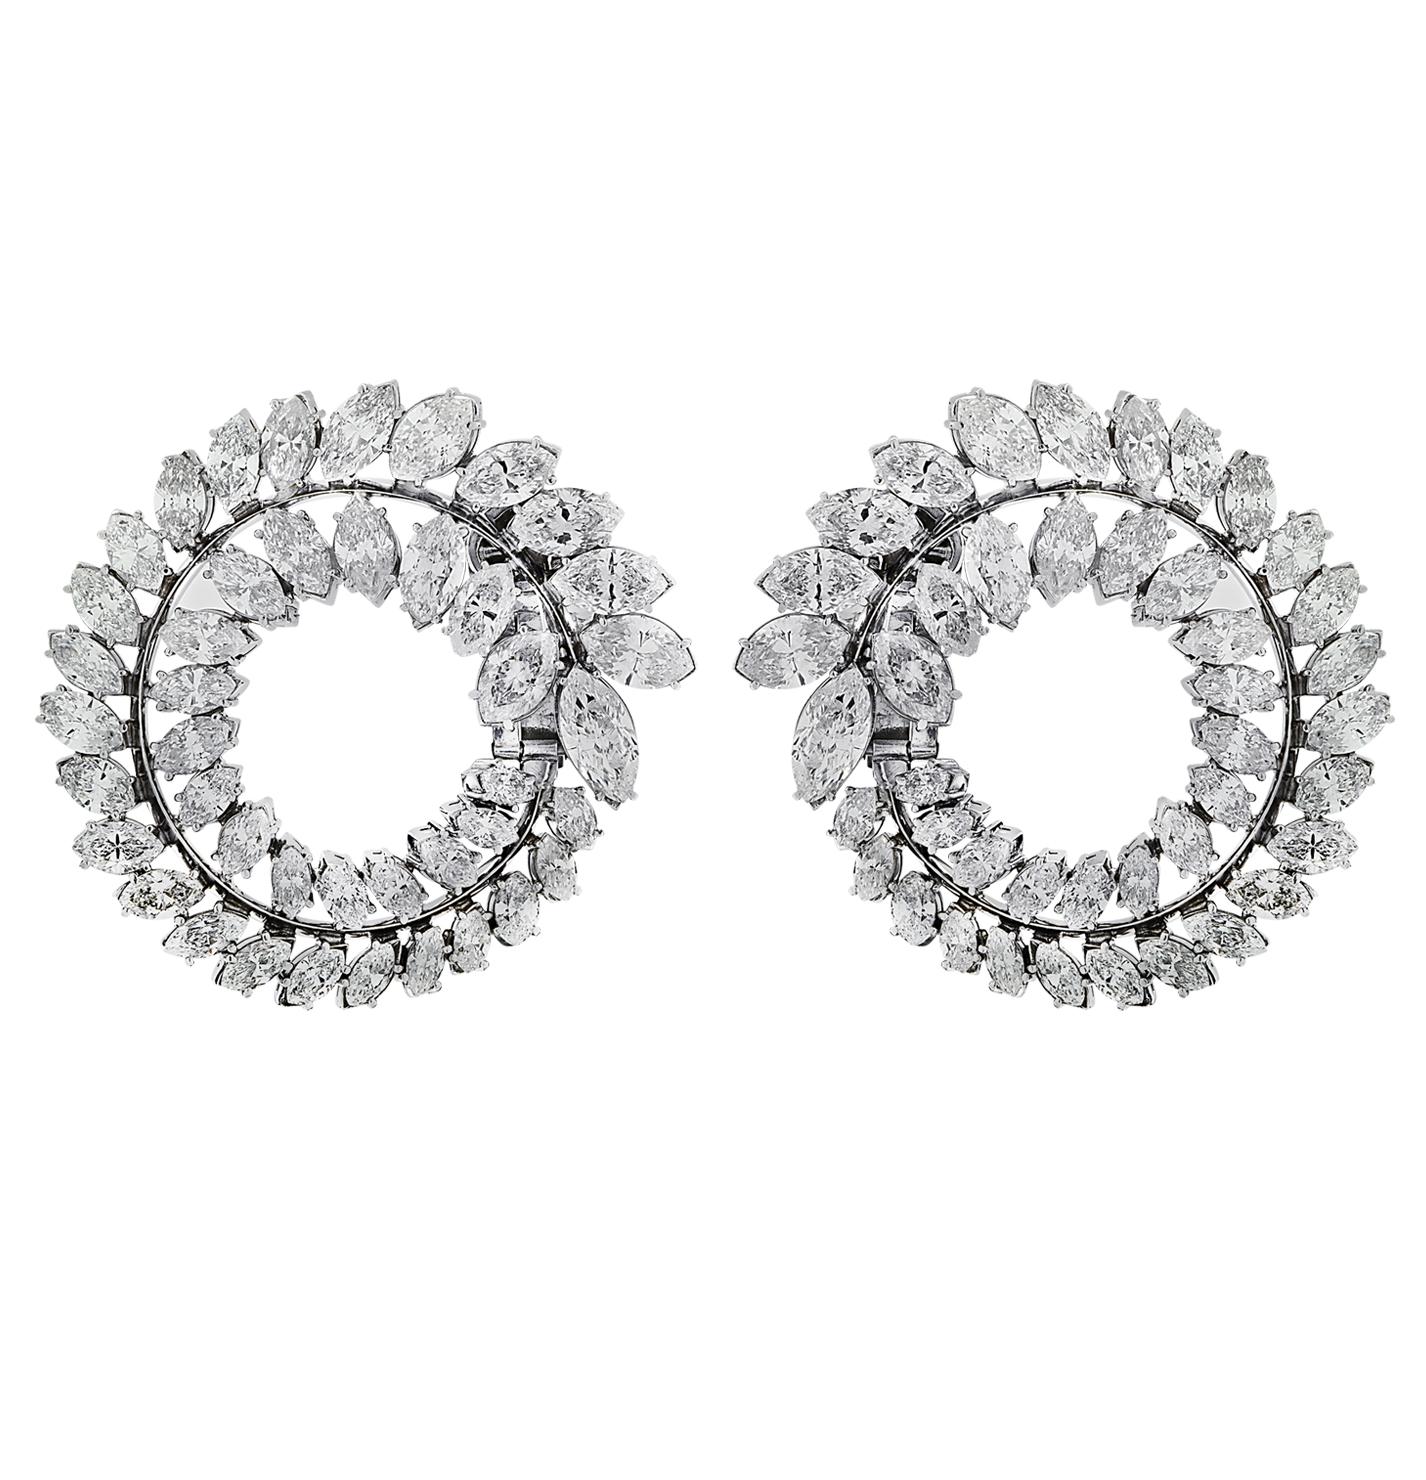 Stunning diamond earrings circa 1950, crafted in platinum, showcasing 86 marquise cut diamonds weighing approximately 28.25 carats total, G-I color, VS-SI clarity. Two rows of diamonds are arranged in open circle designs, which swirl from the front